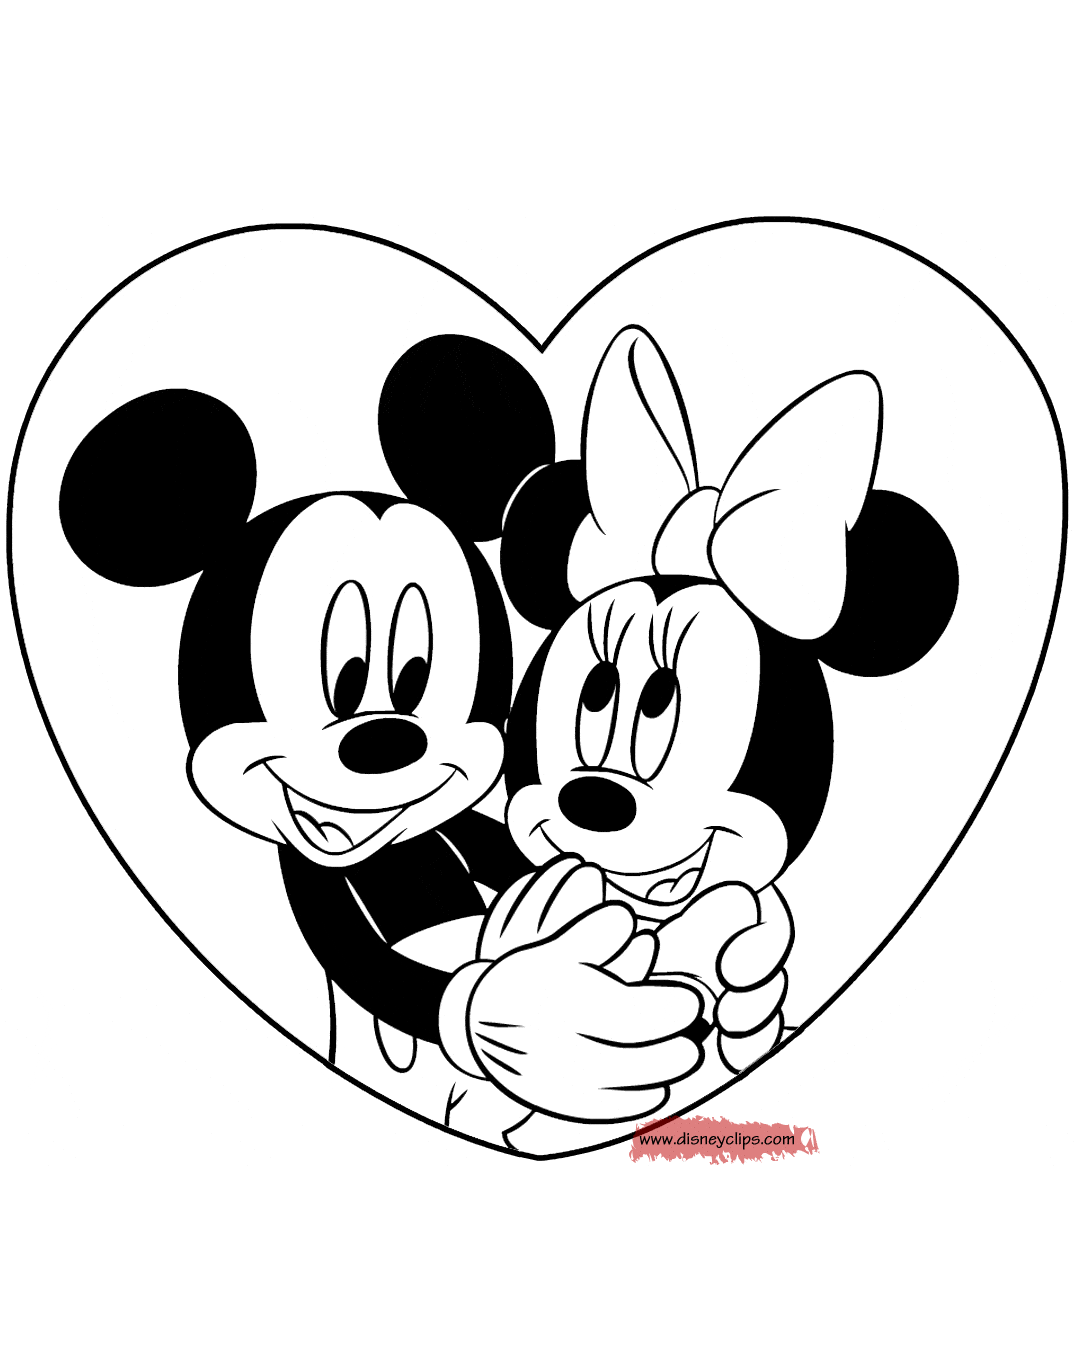 Minnie kissing Mickey coloring page Mickey and Minnie in love